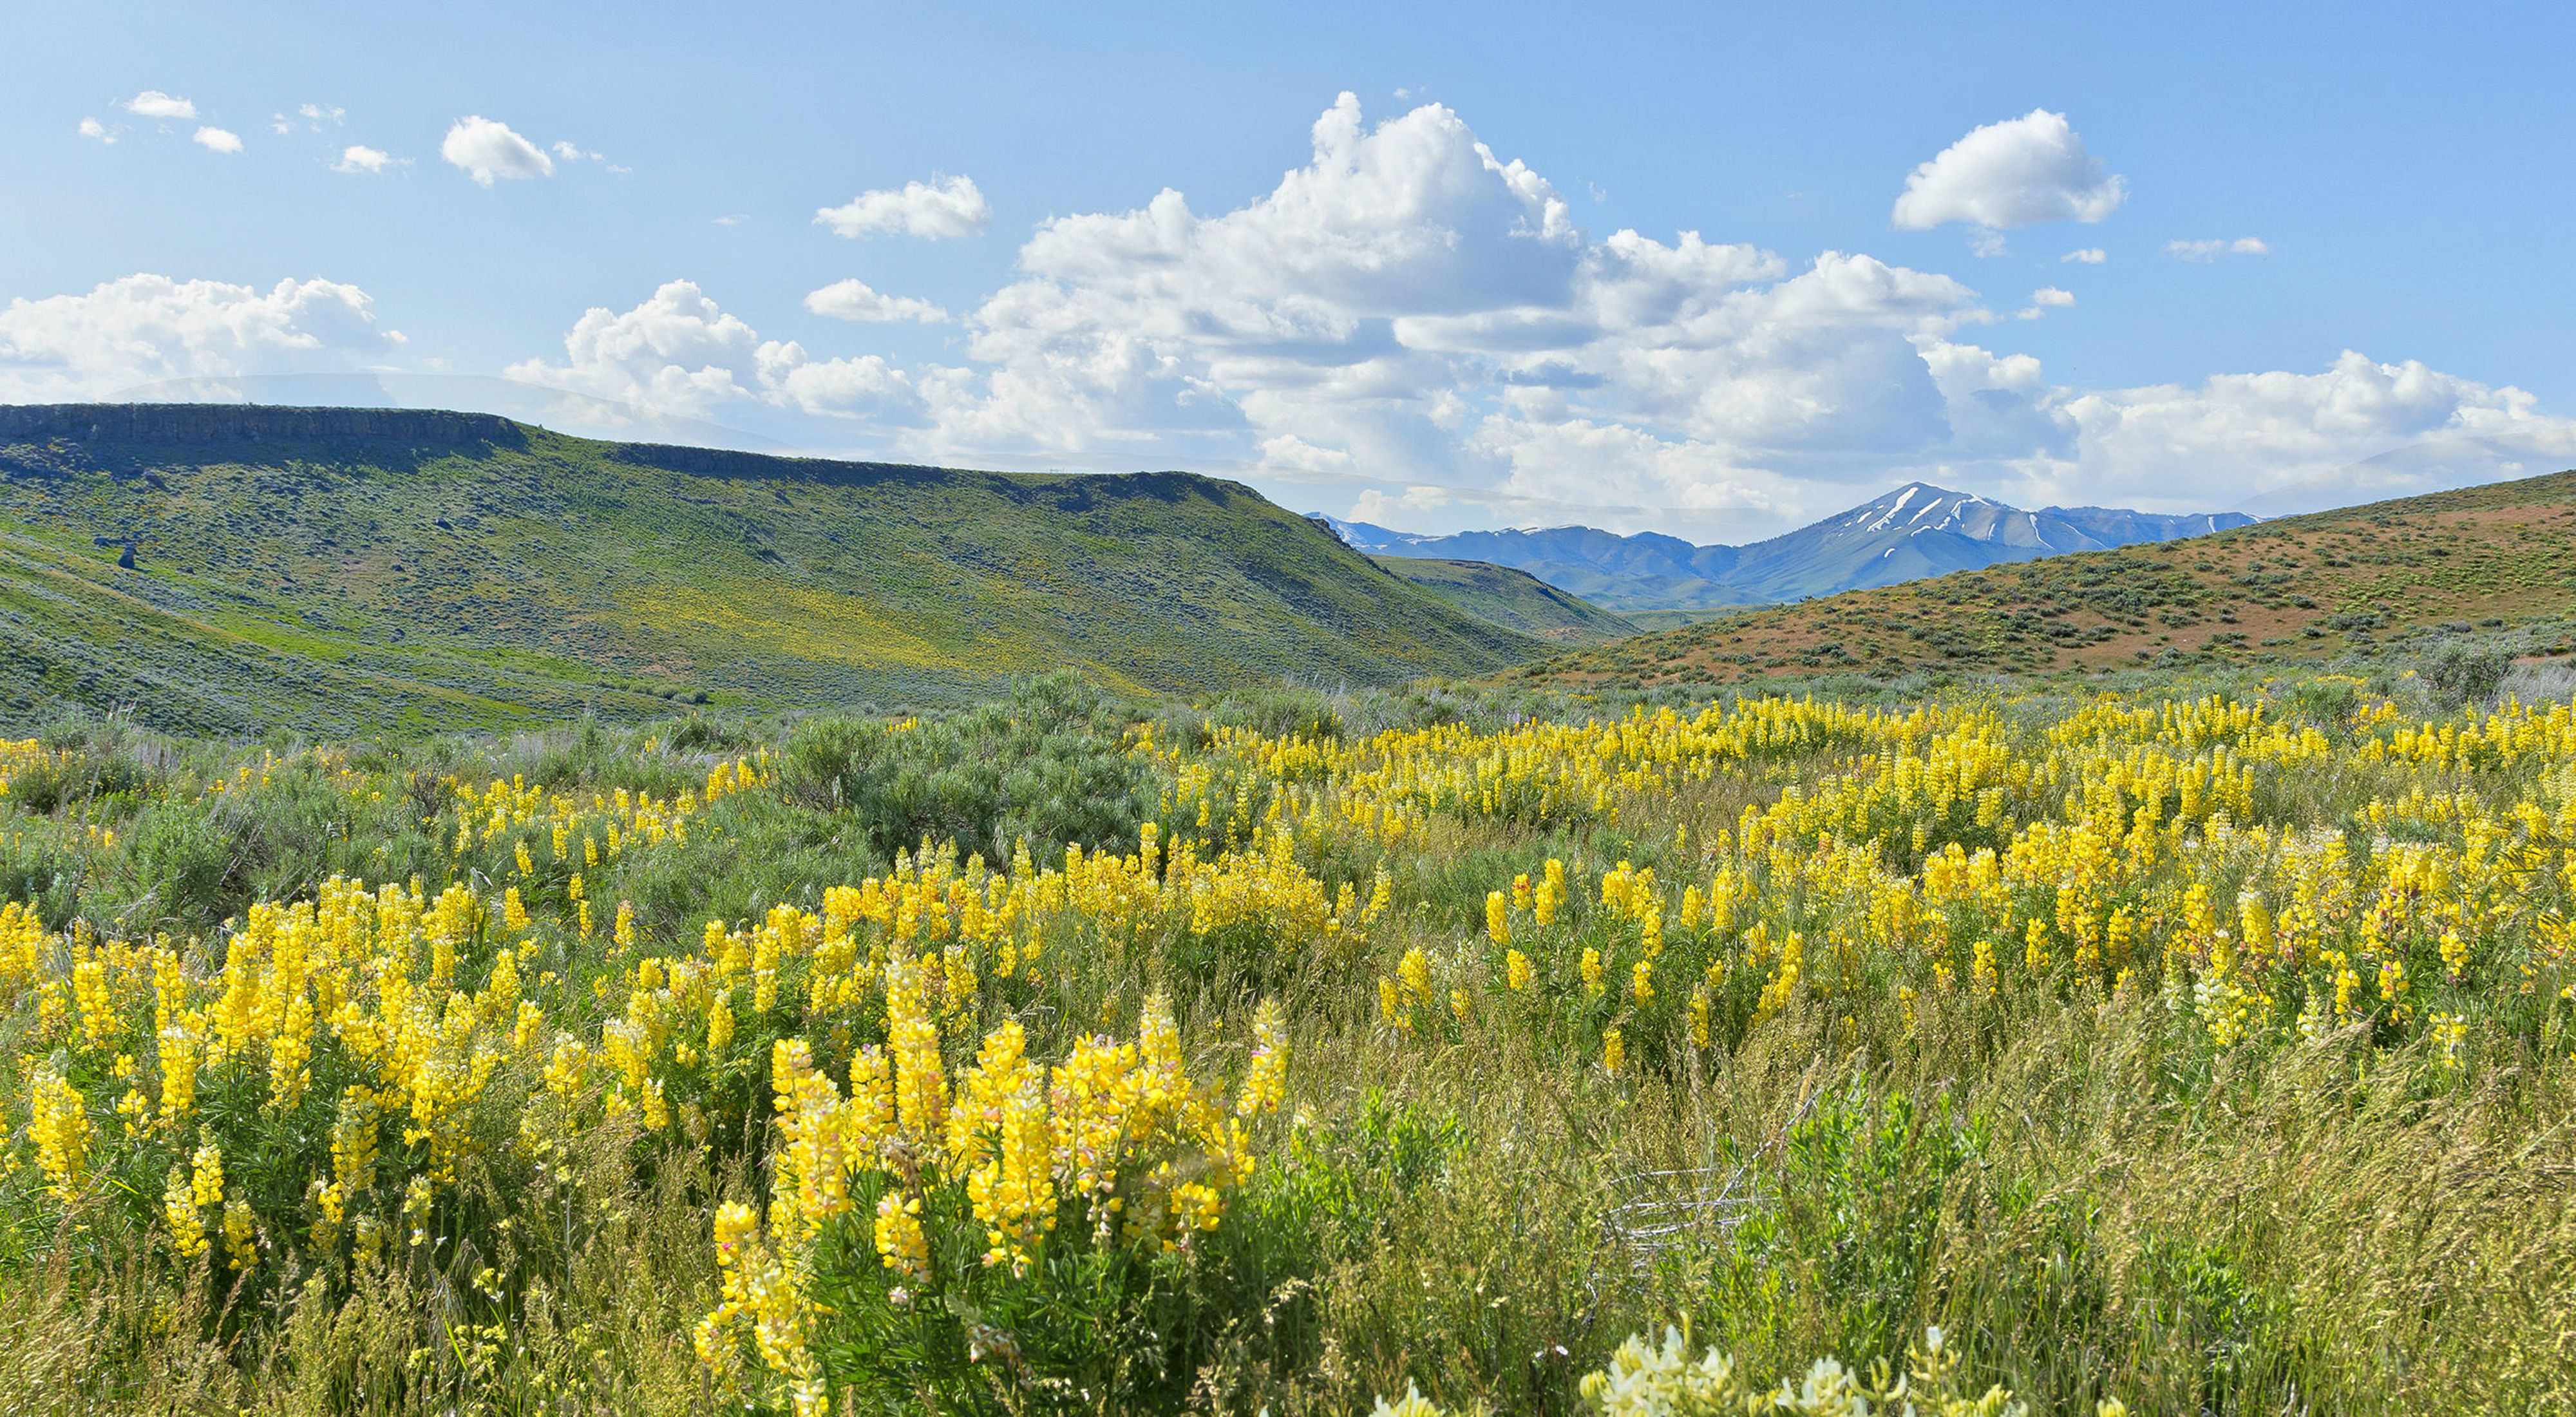 Yellow flowers bloom in an open mountain meadow. Snow capped mountain peaks rise in the background under white puffy clouds.